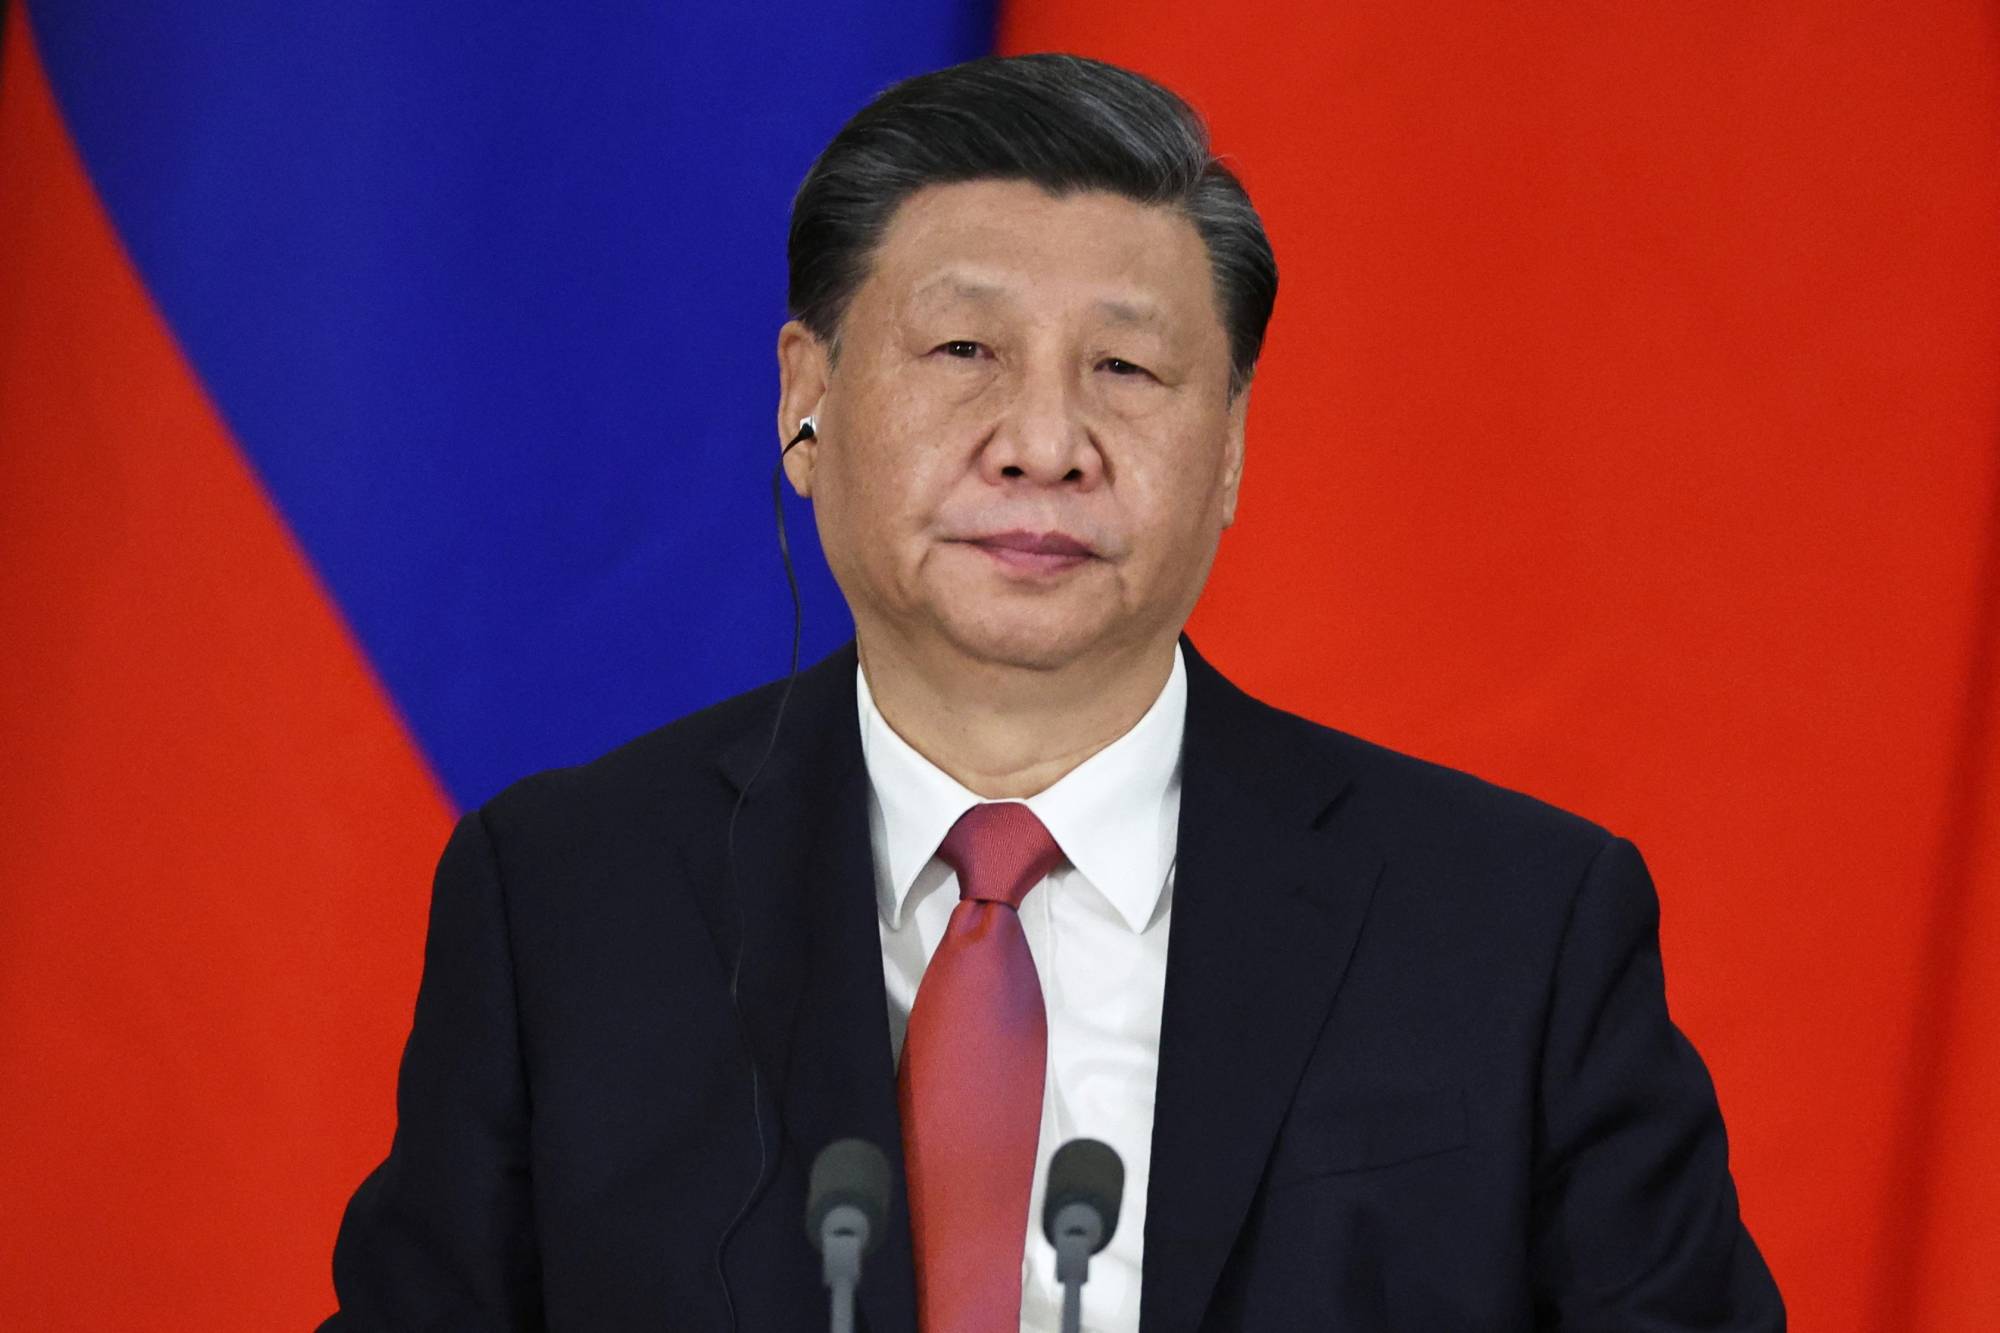 Chinese President Xi Jinping on March 21. Under the leader, China has become something of a troublemaker in the international community. | SPUTNIK / MIKHAIL TERESHCHENKO / POOL / VIA REUTERS